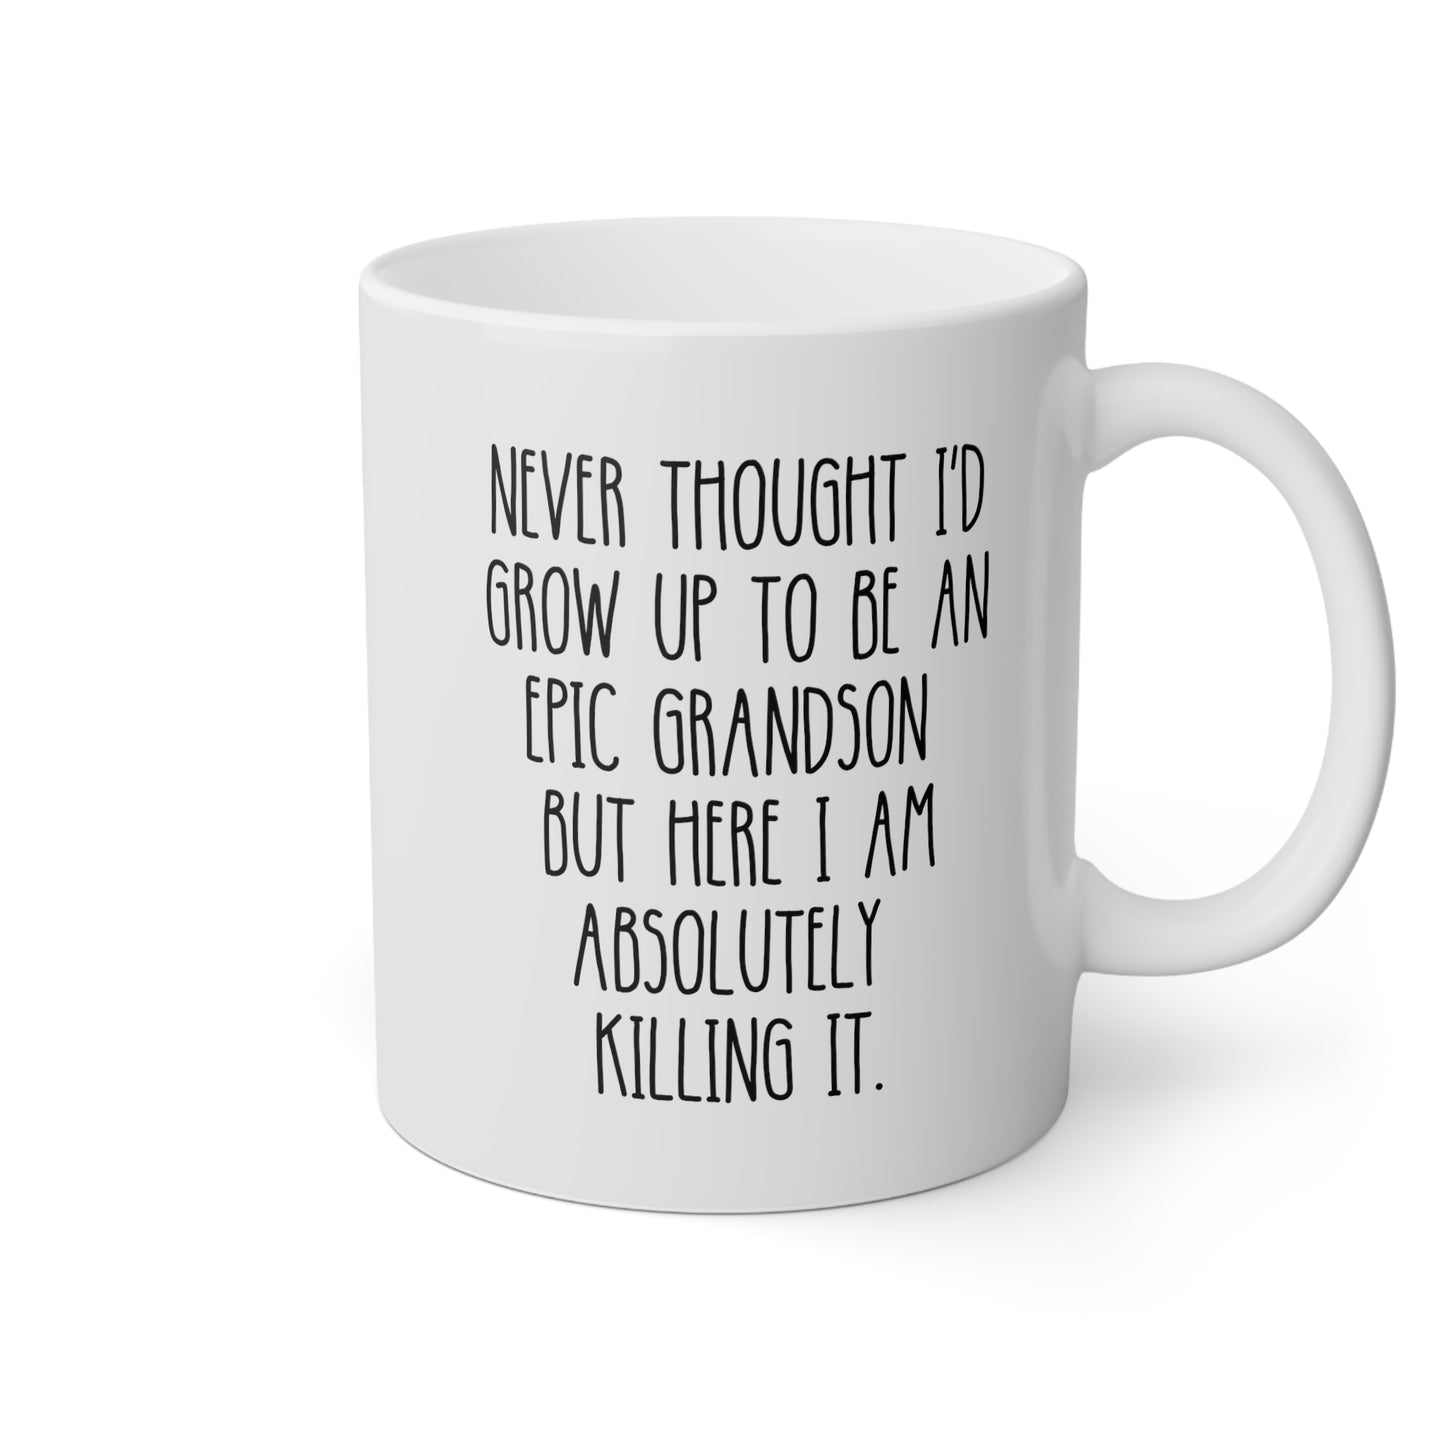 Never Thought I'd Grow Up To Be An Epic Grandson But Here I Am Absolutely Killing It 11oz white funny large coffee mug gift for grandparent waveywares wavey wares wavywares wavy wares